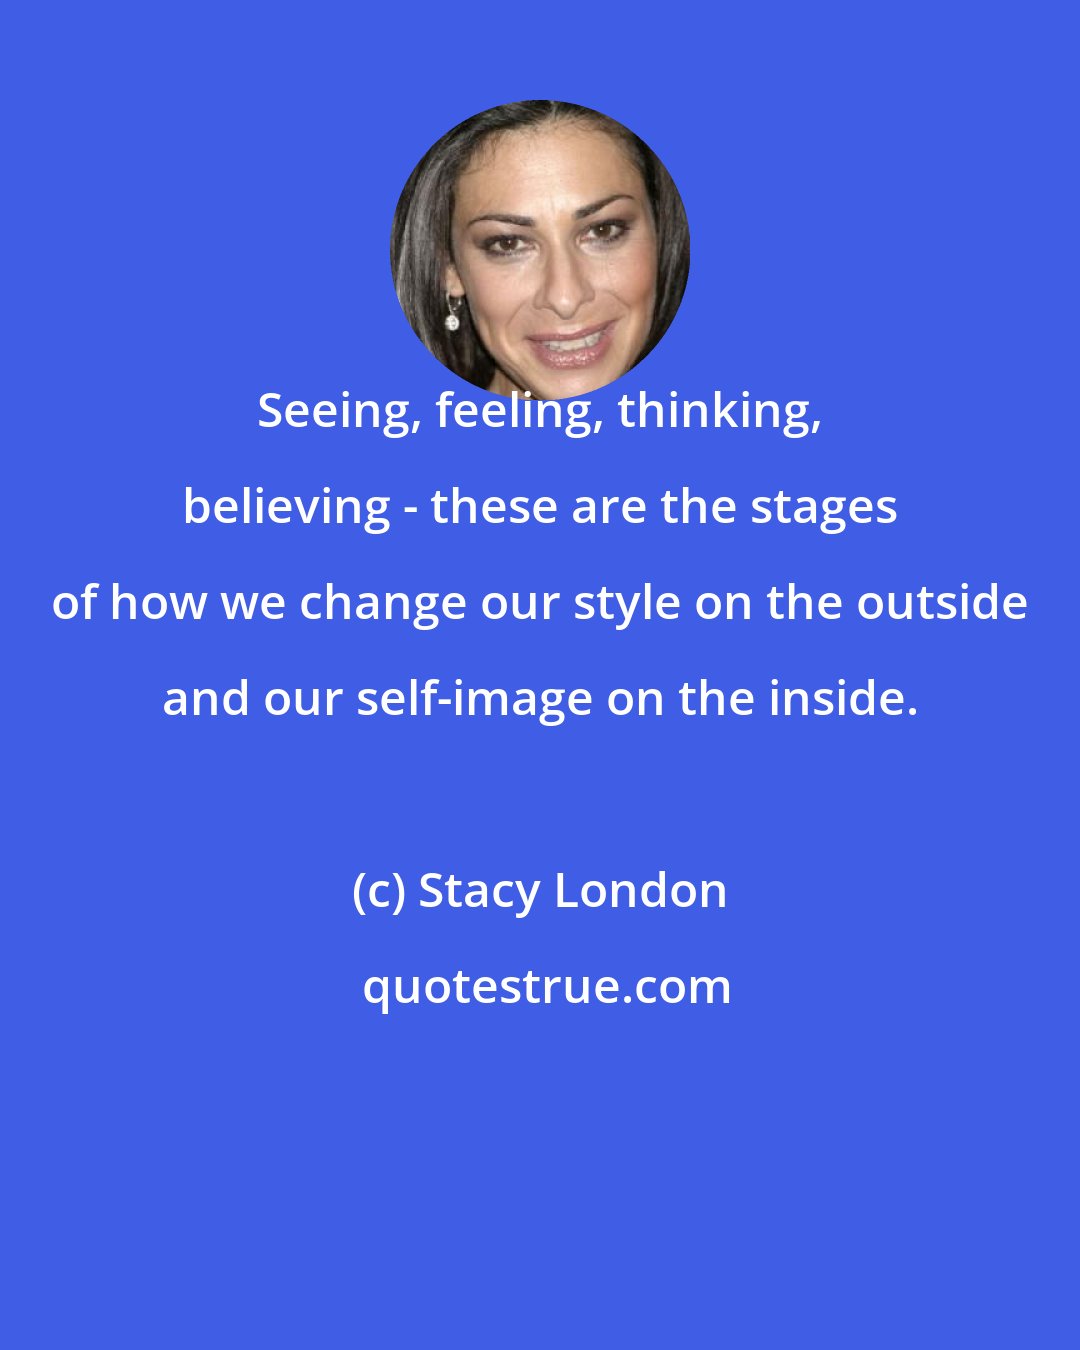 Stacy London: Seeing, feeling, thinking, believing - these are the stages of how we change our style on the outside and our self-image on the inside.